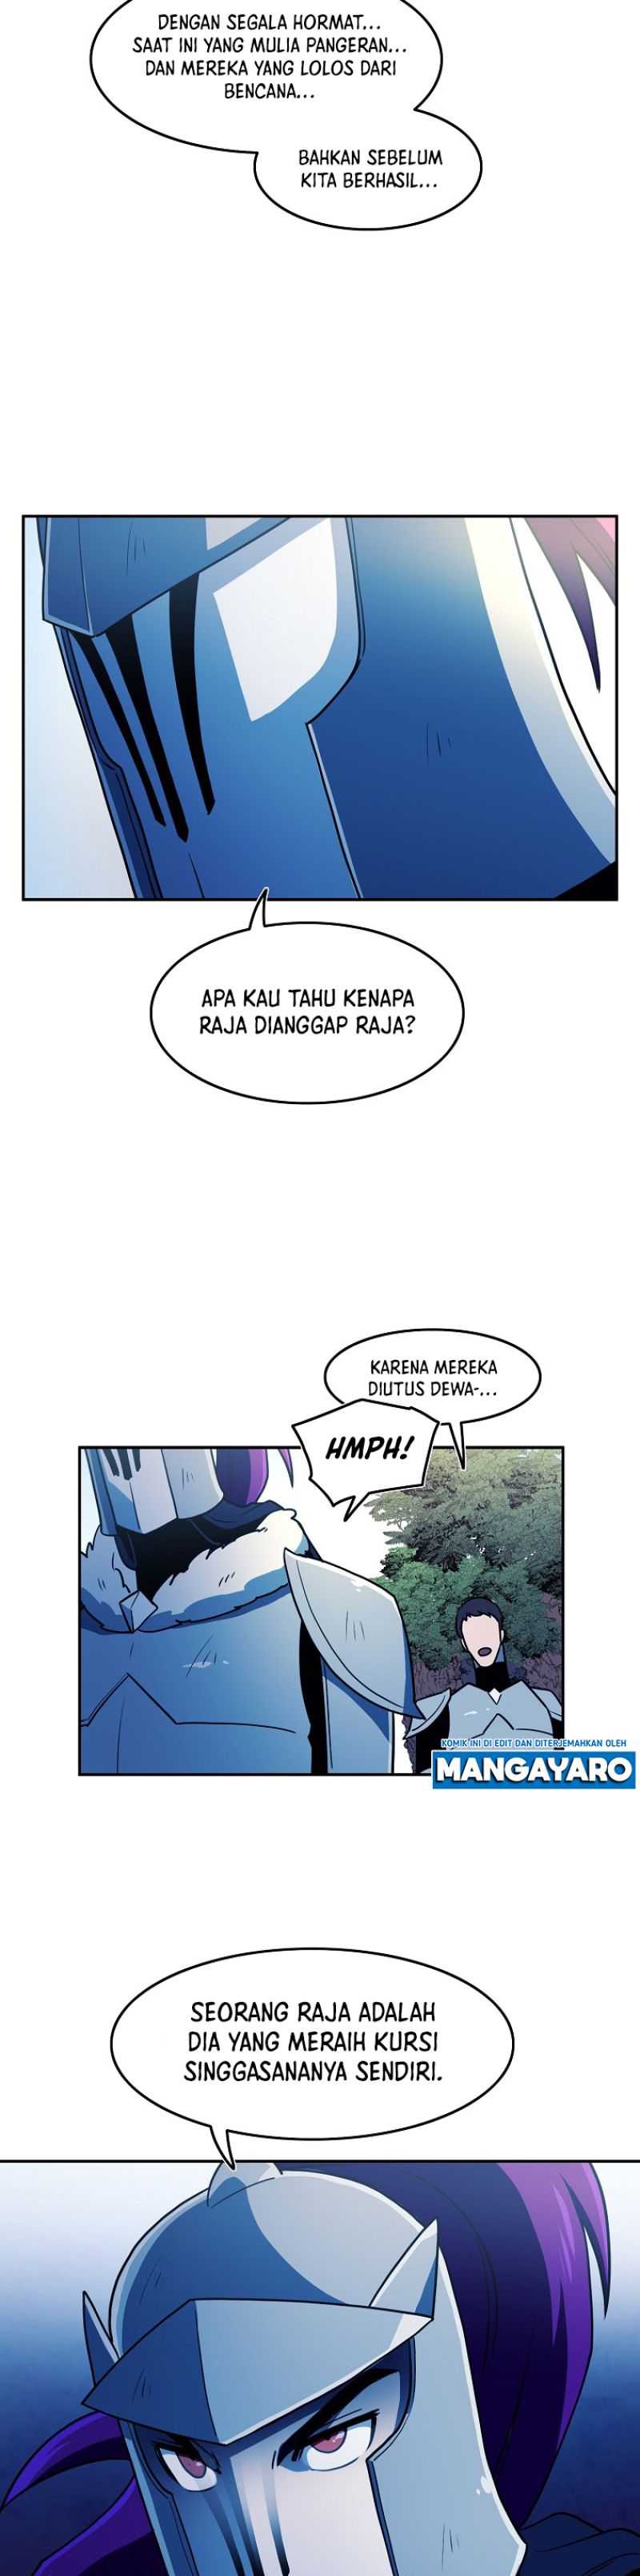 Magical Shooting : Sniper of Steel Chapter 45